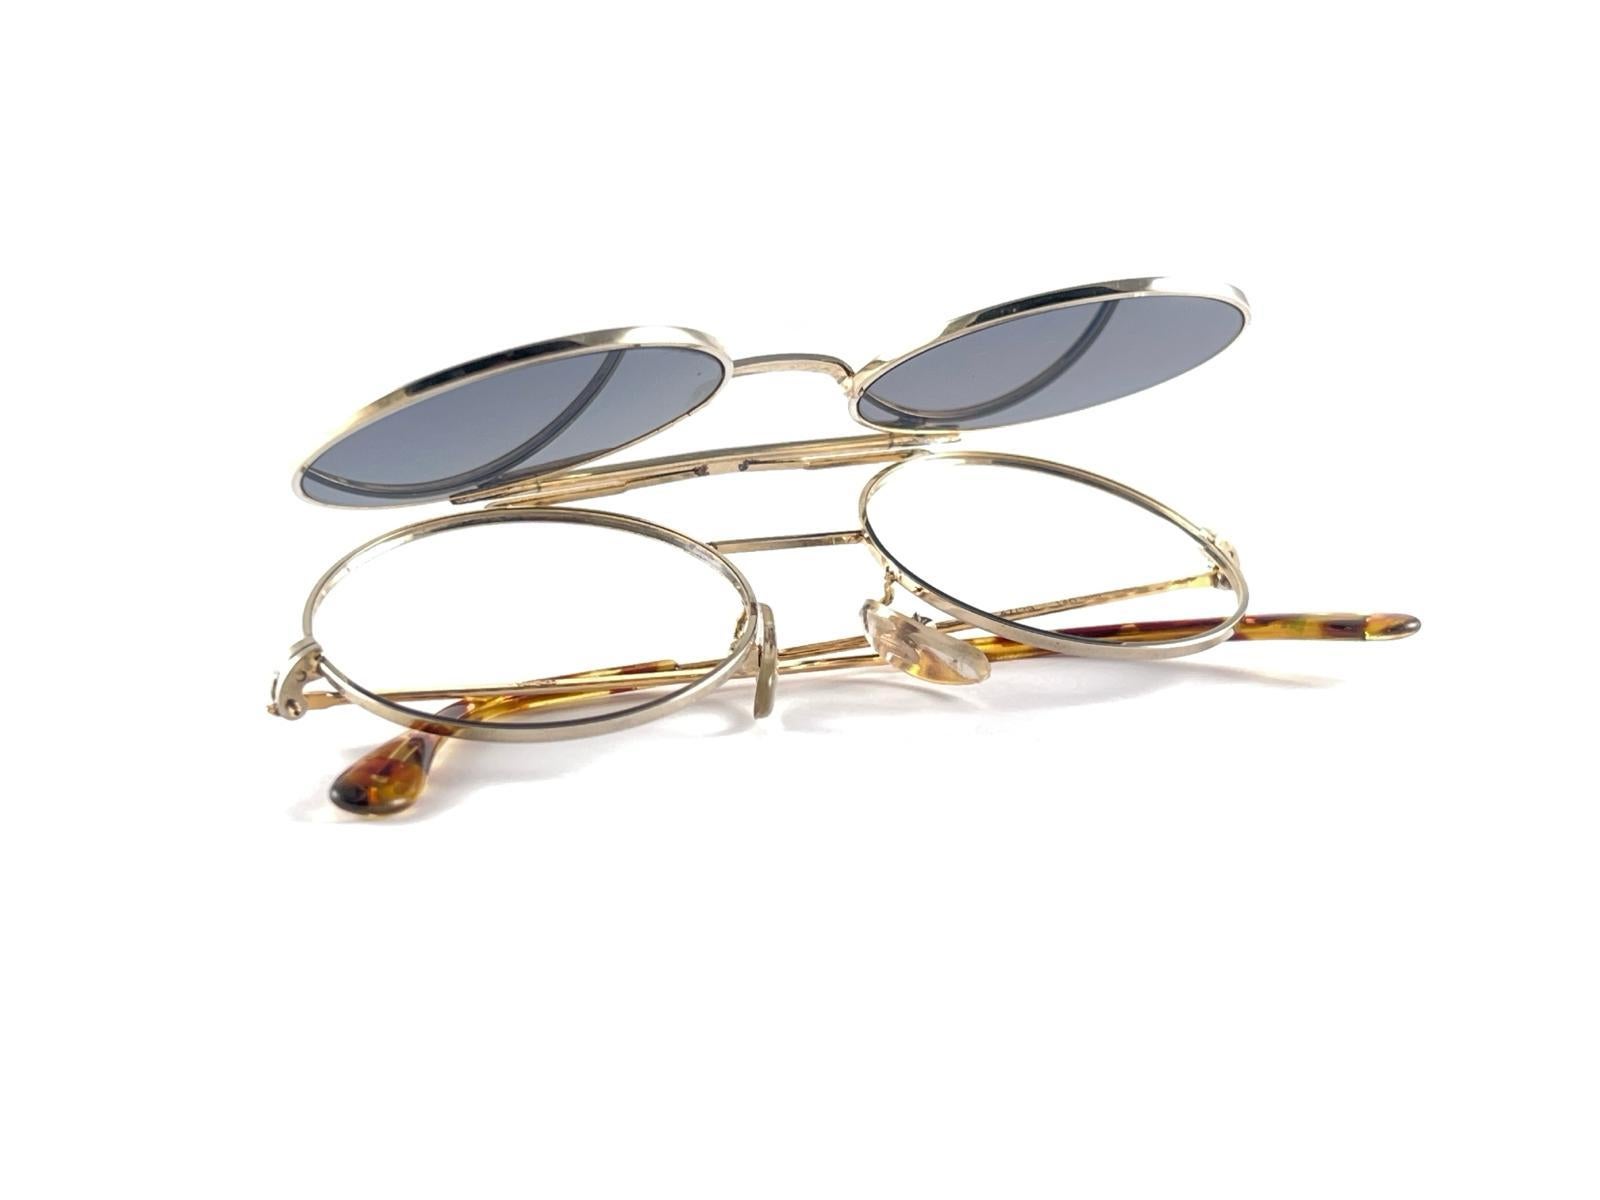 New Rare Vintage Kenzo 47/29 Hinged Silver & Gold Sunglasses 1980's Japan For Sale 5